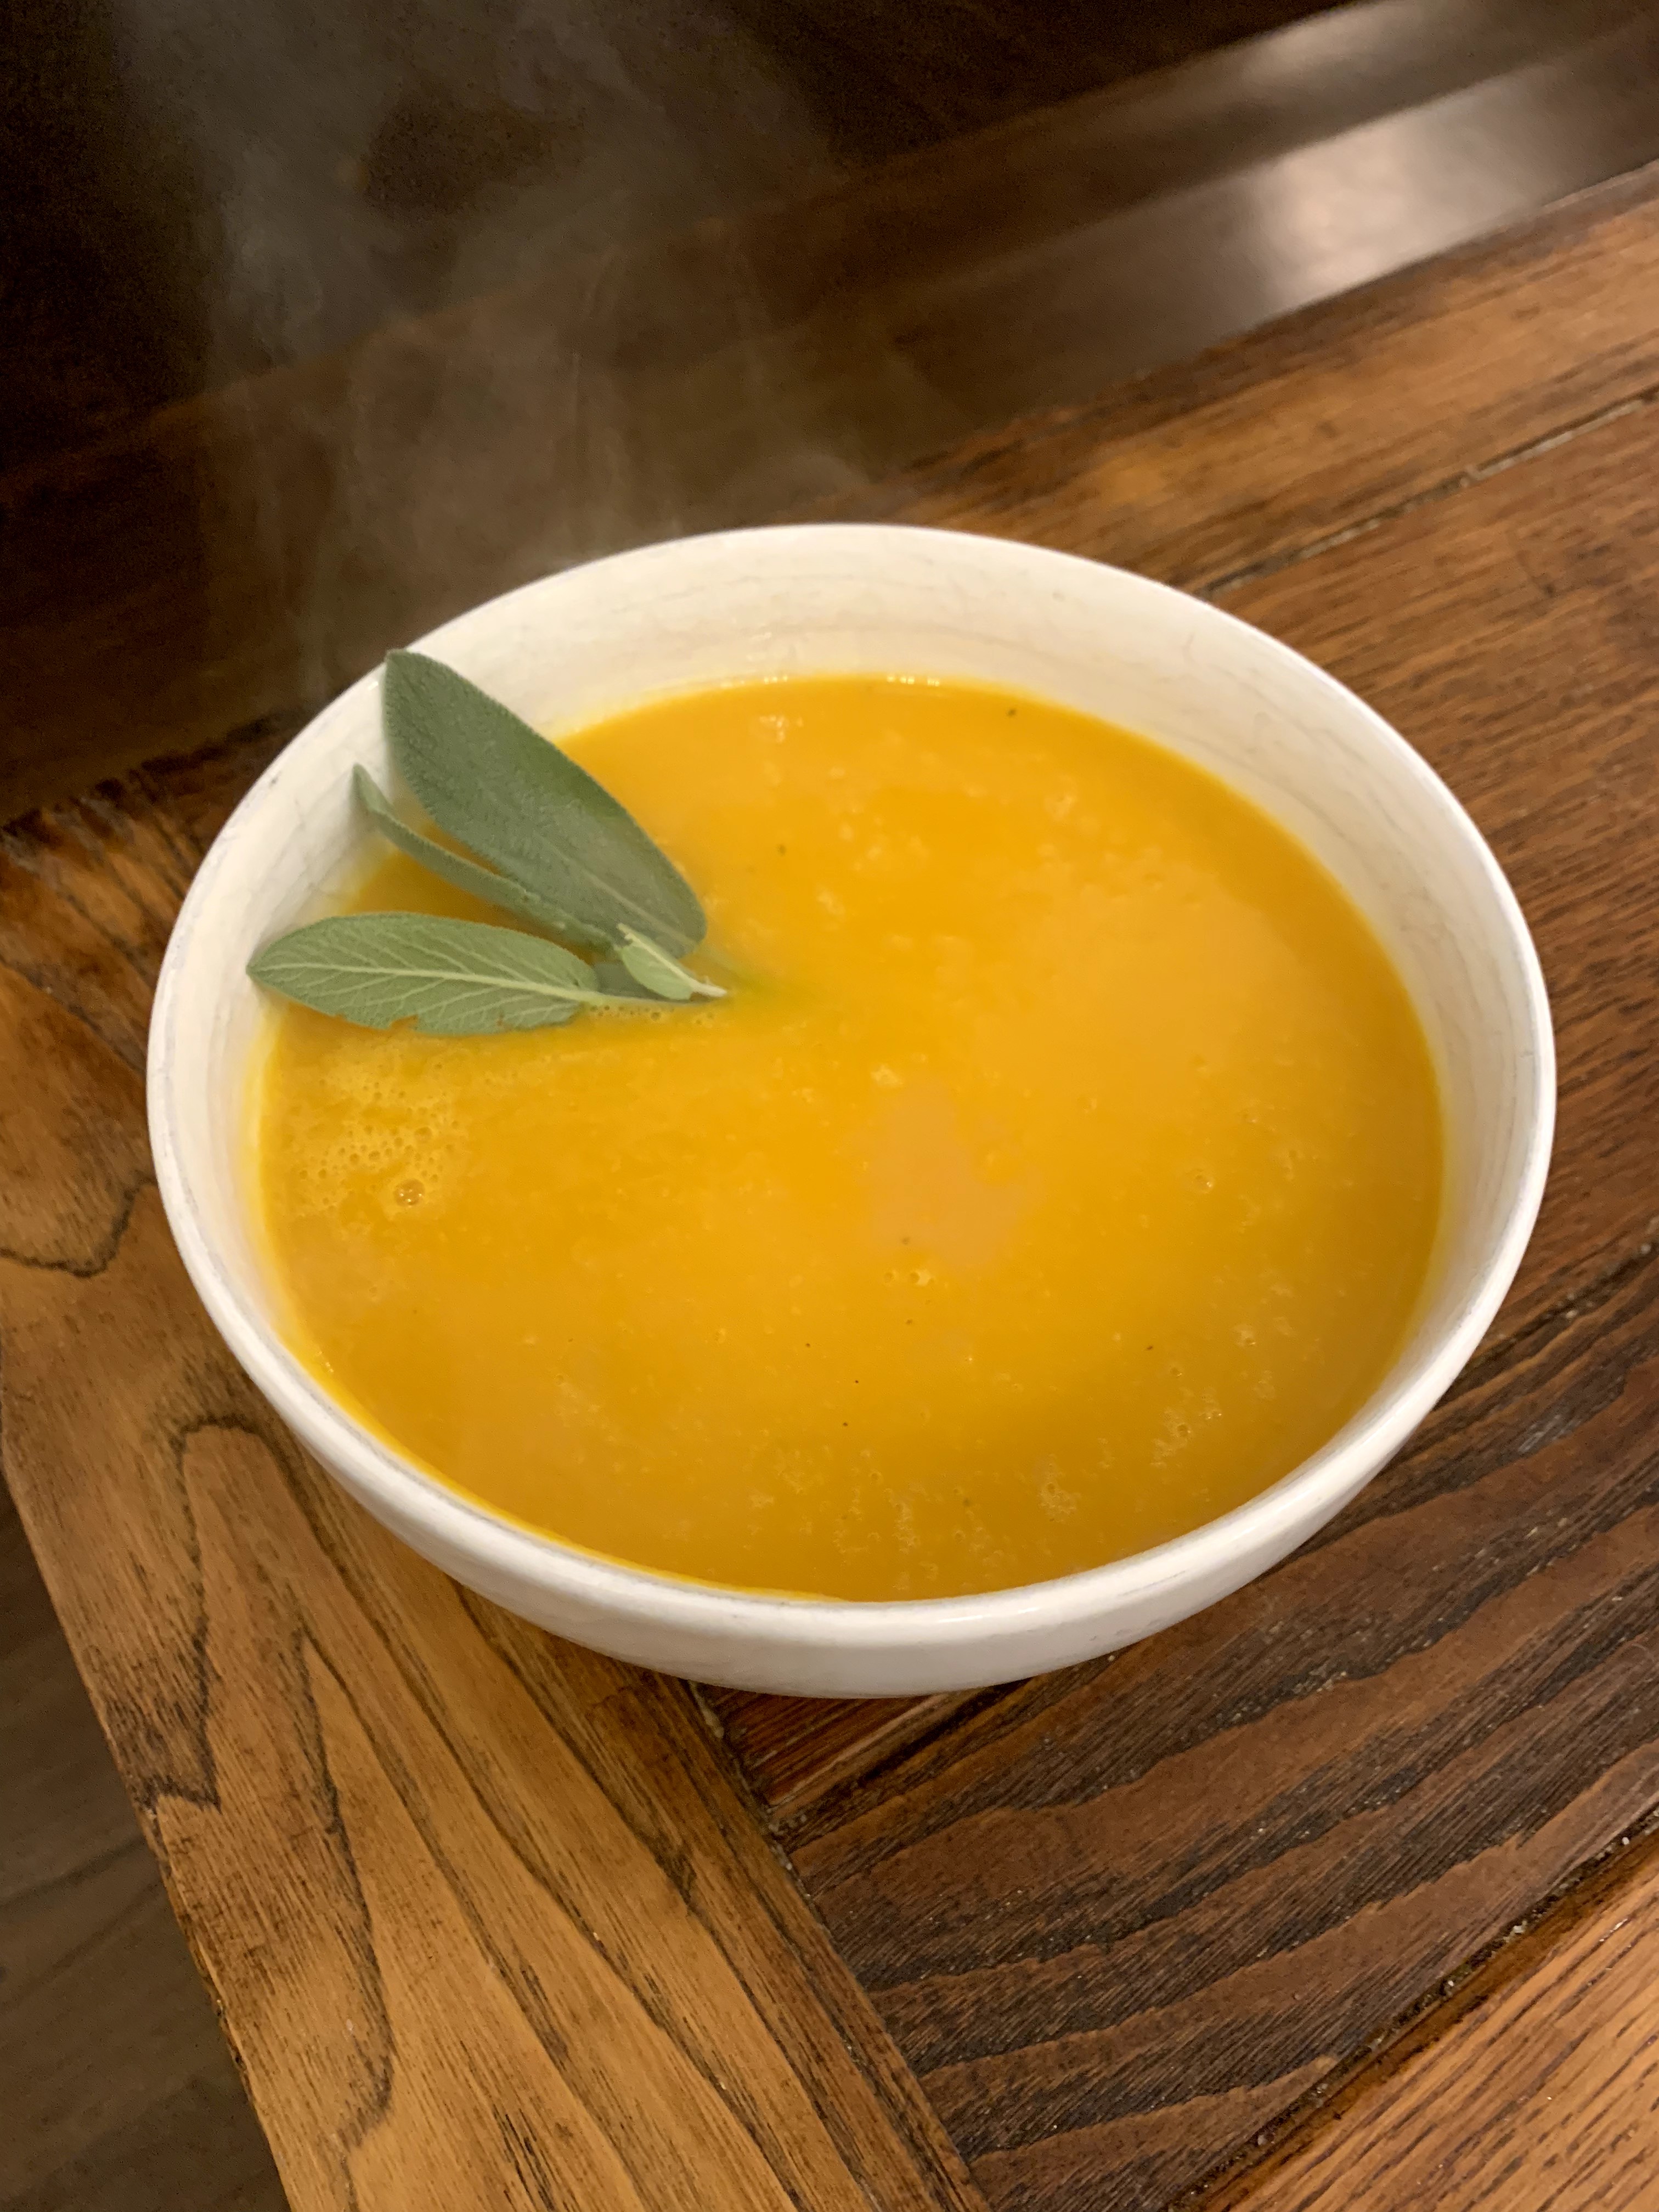 Delicious recipe for butternut squash and apple soup